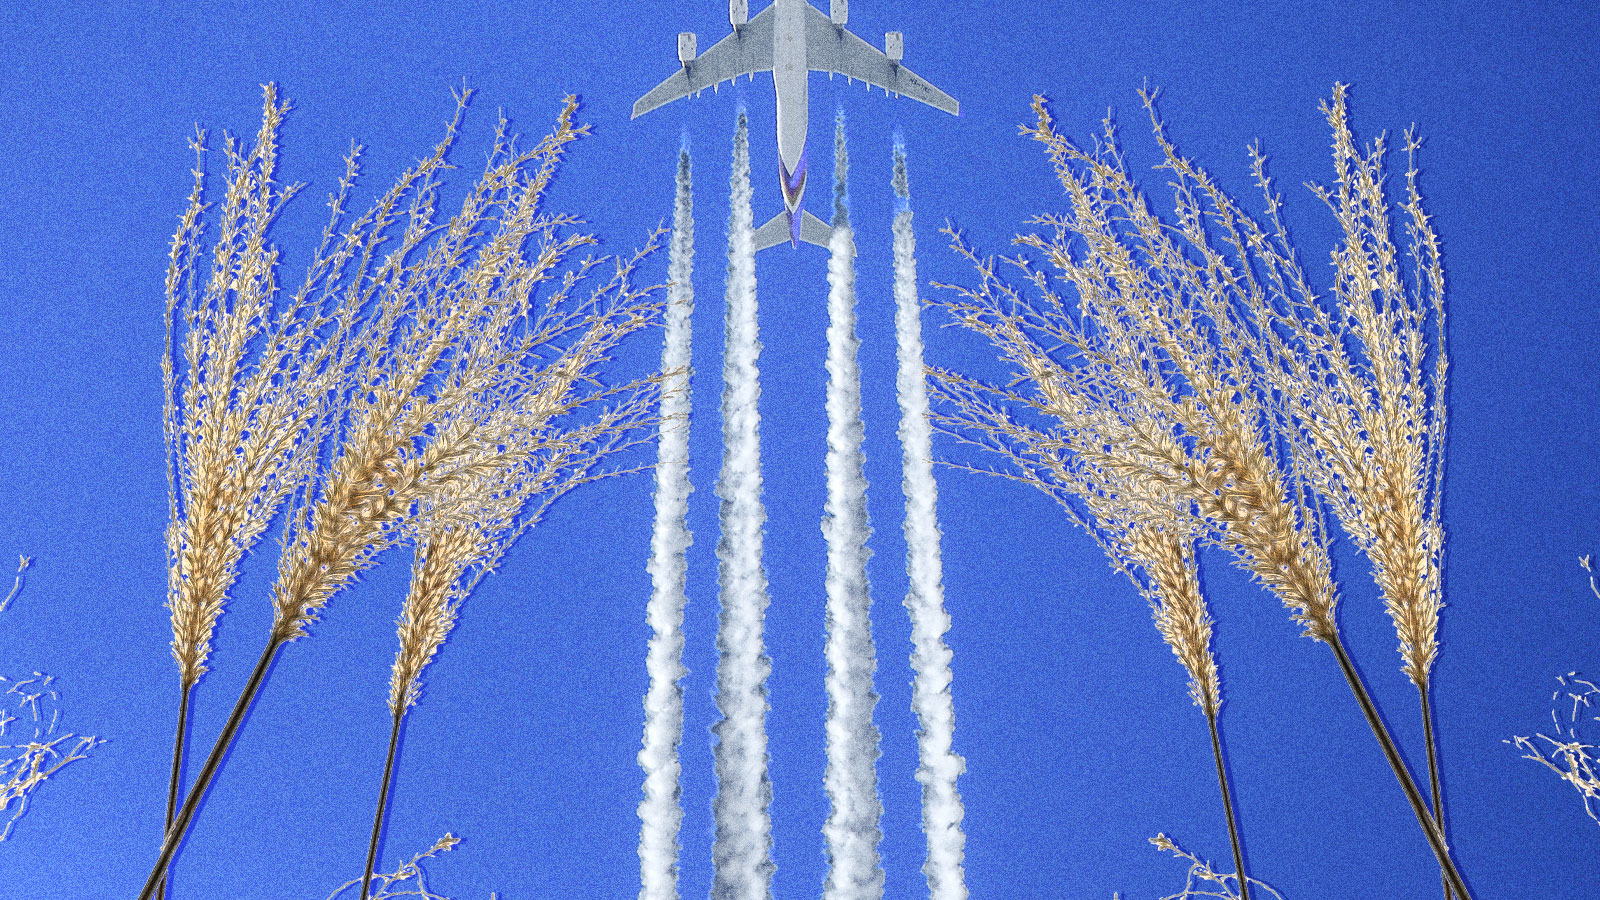 fronds of switchgrass with an airplane taking off above them